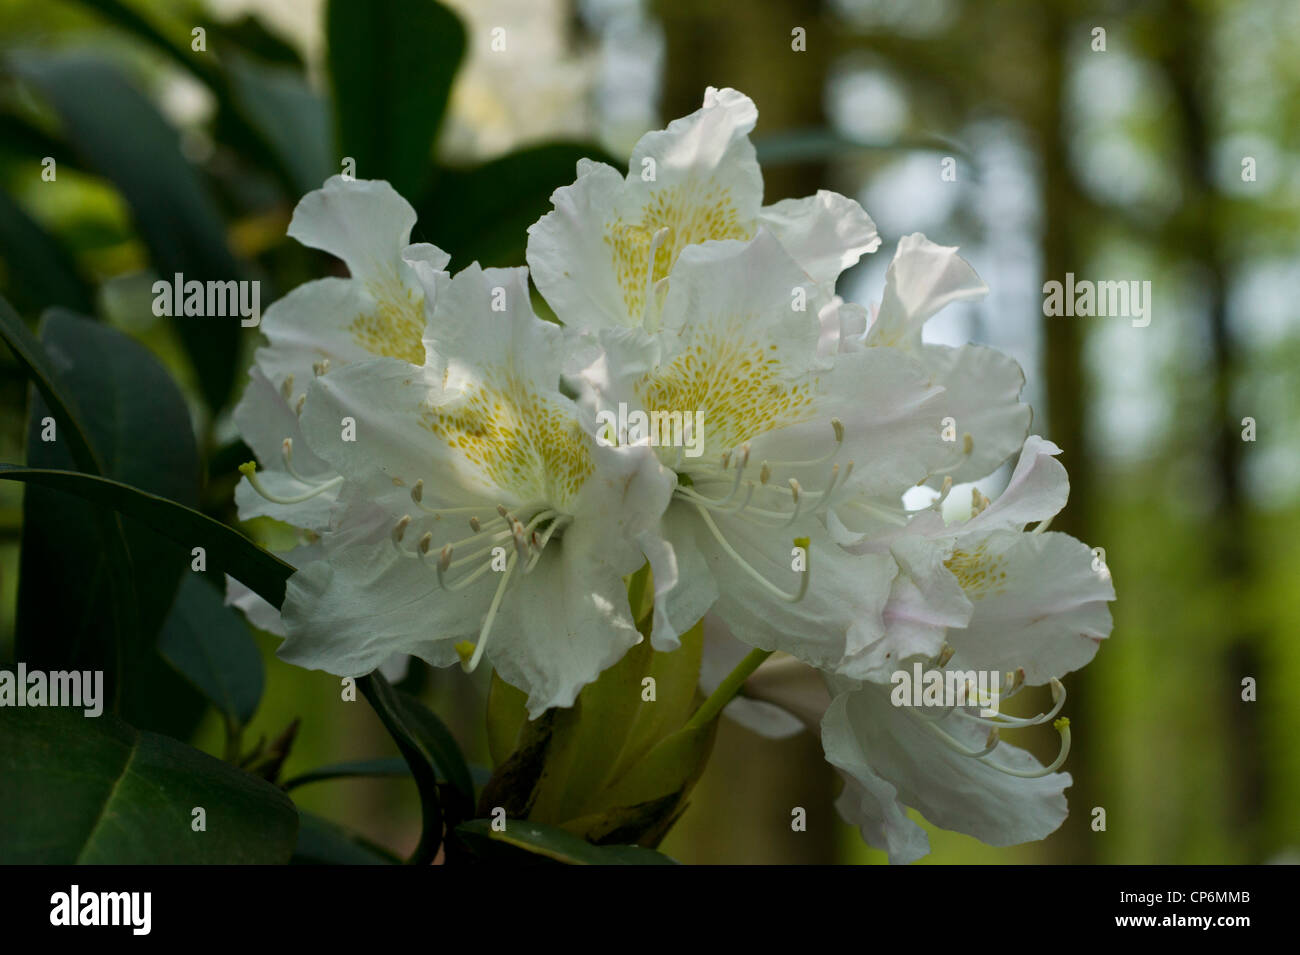 White Rhododendrons close up Stock Photo